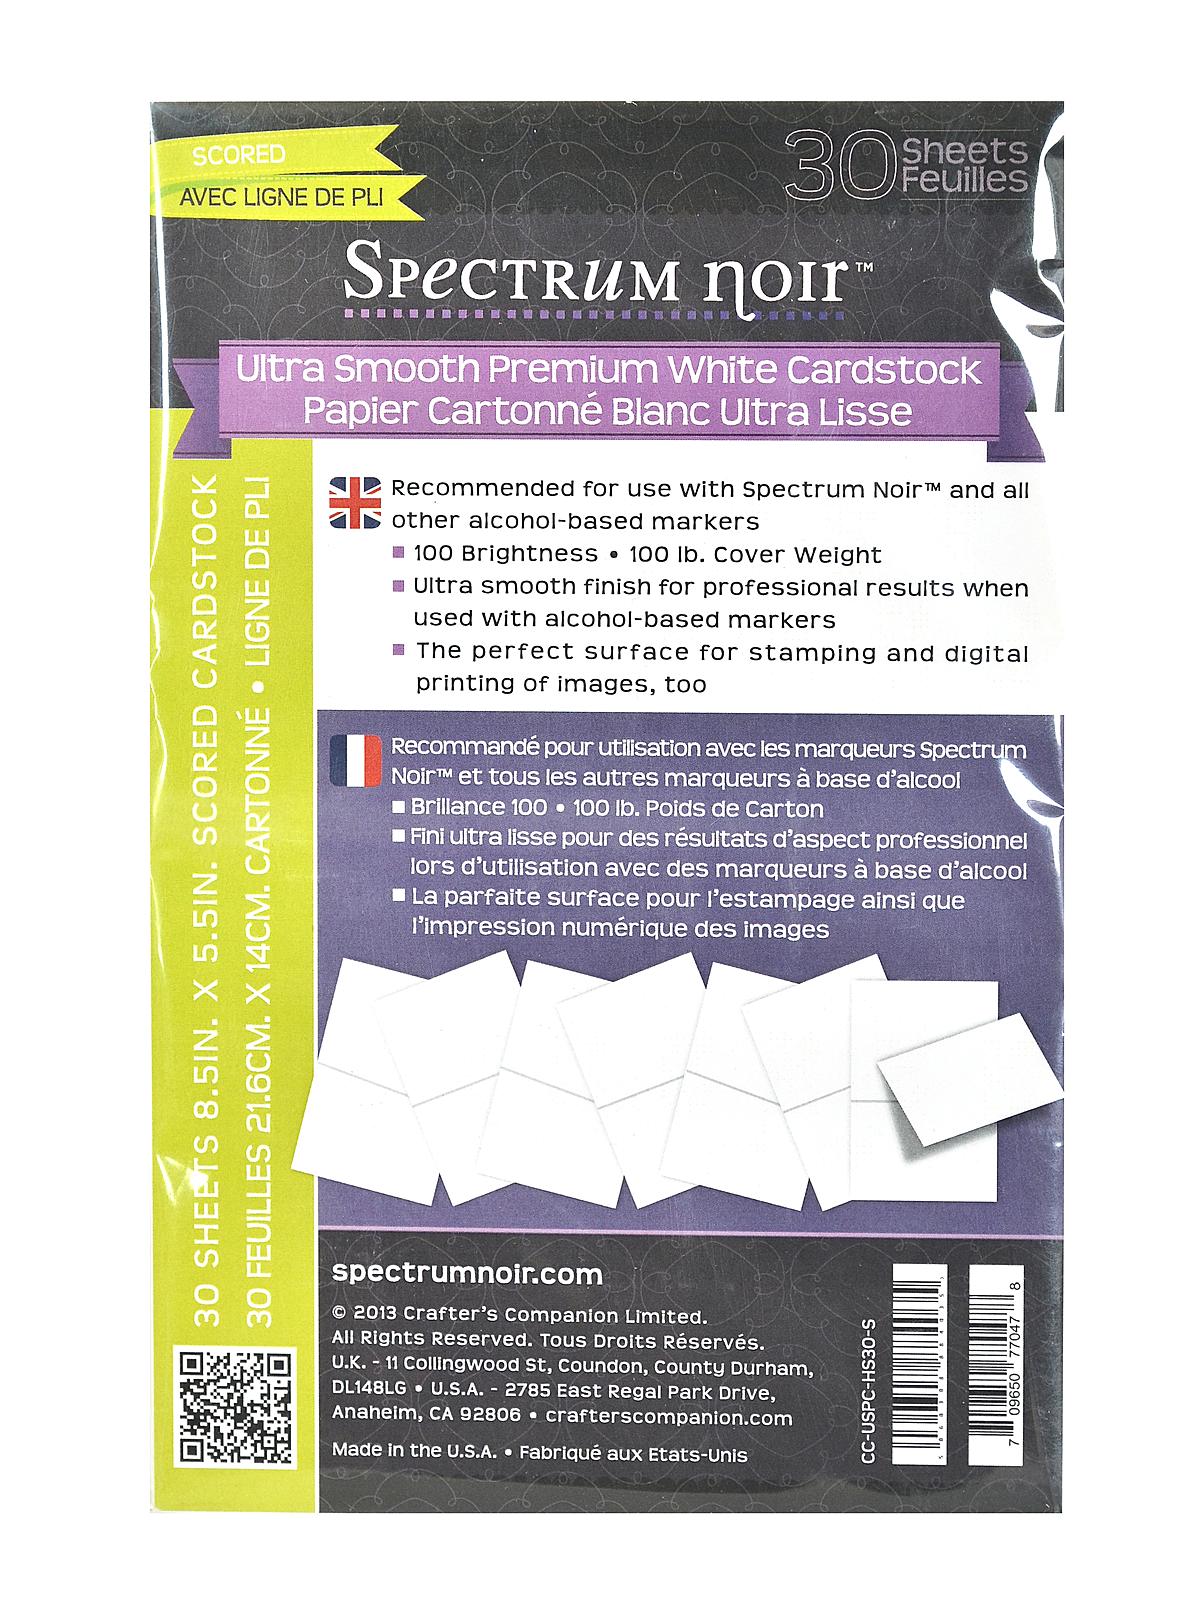 Cardstock Ultra Smooth 8 1 2 In. X 5 1 2 In. Pack Of 30 Scored Sheets